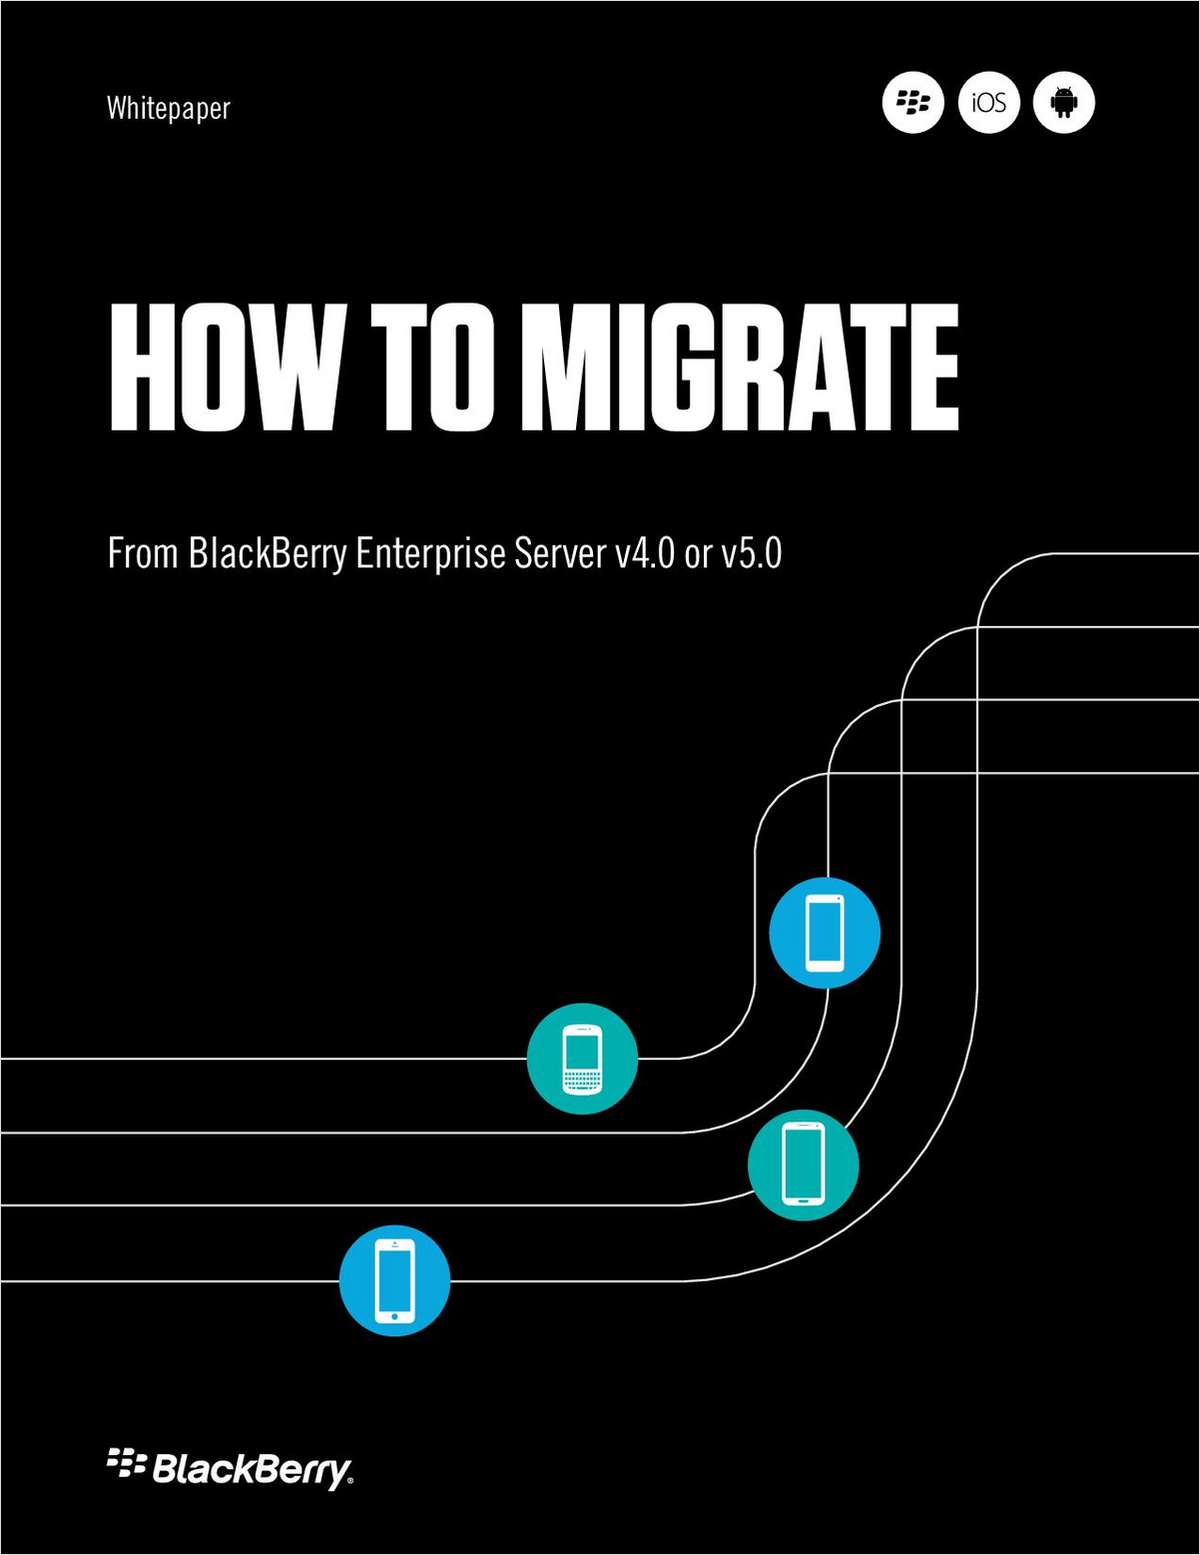 How to Migrate from BlackBerry Enterprise Server v4.0 or v5.0 to BlackBerry Enterprise Service 10